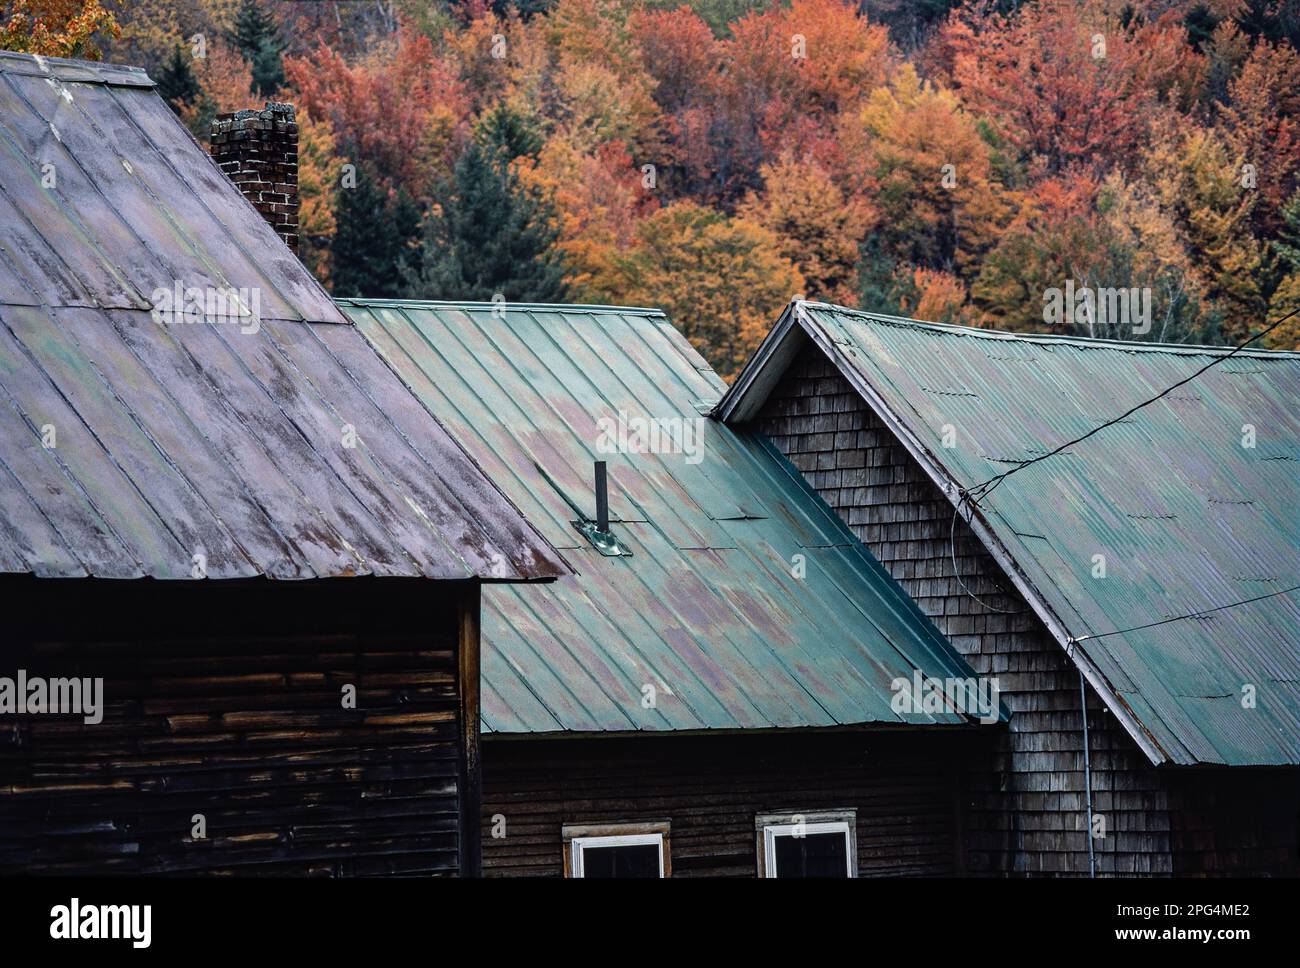 weathered barns with tarnished copper sheet roofs complement the autumn colors in the trees in background in southern VT Stock Photo